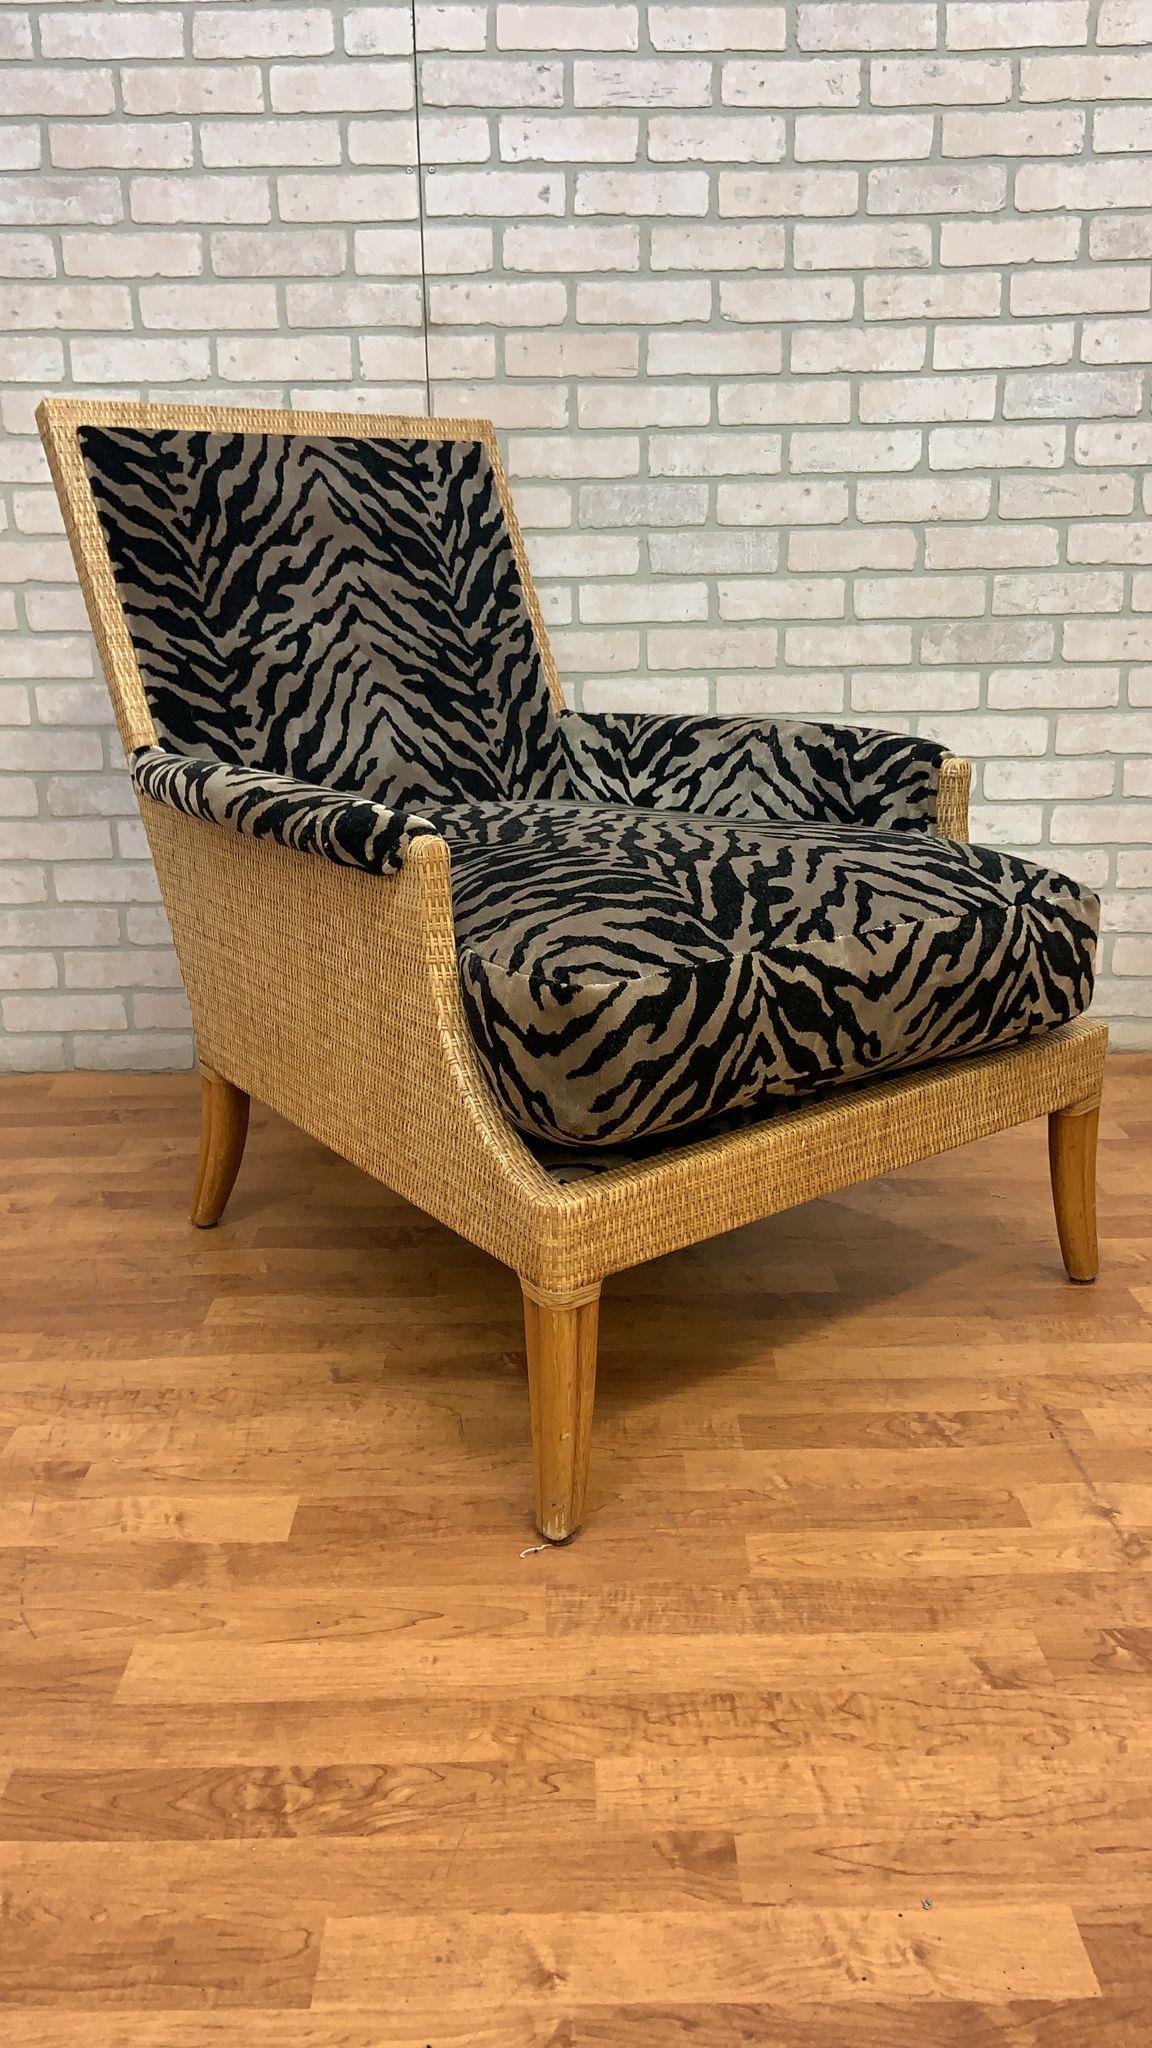 Vintage McGuire Rattan and Wicker Umbria Lounge Chair with Ottoman, 2 Piece Set For Sale 4